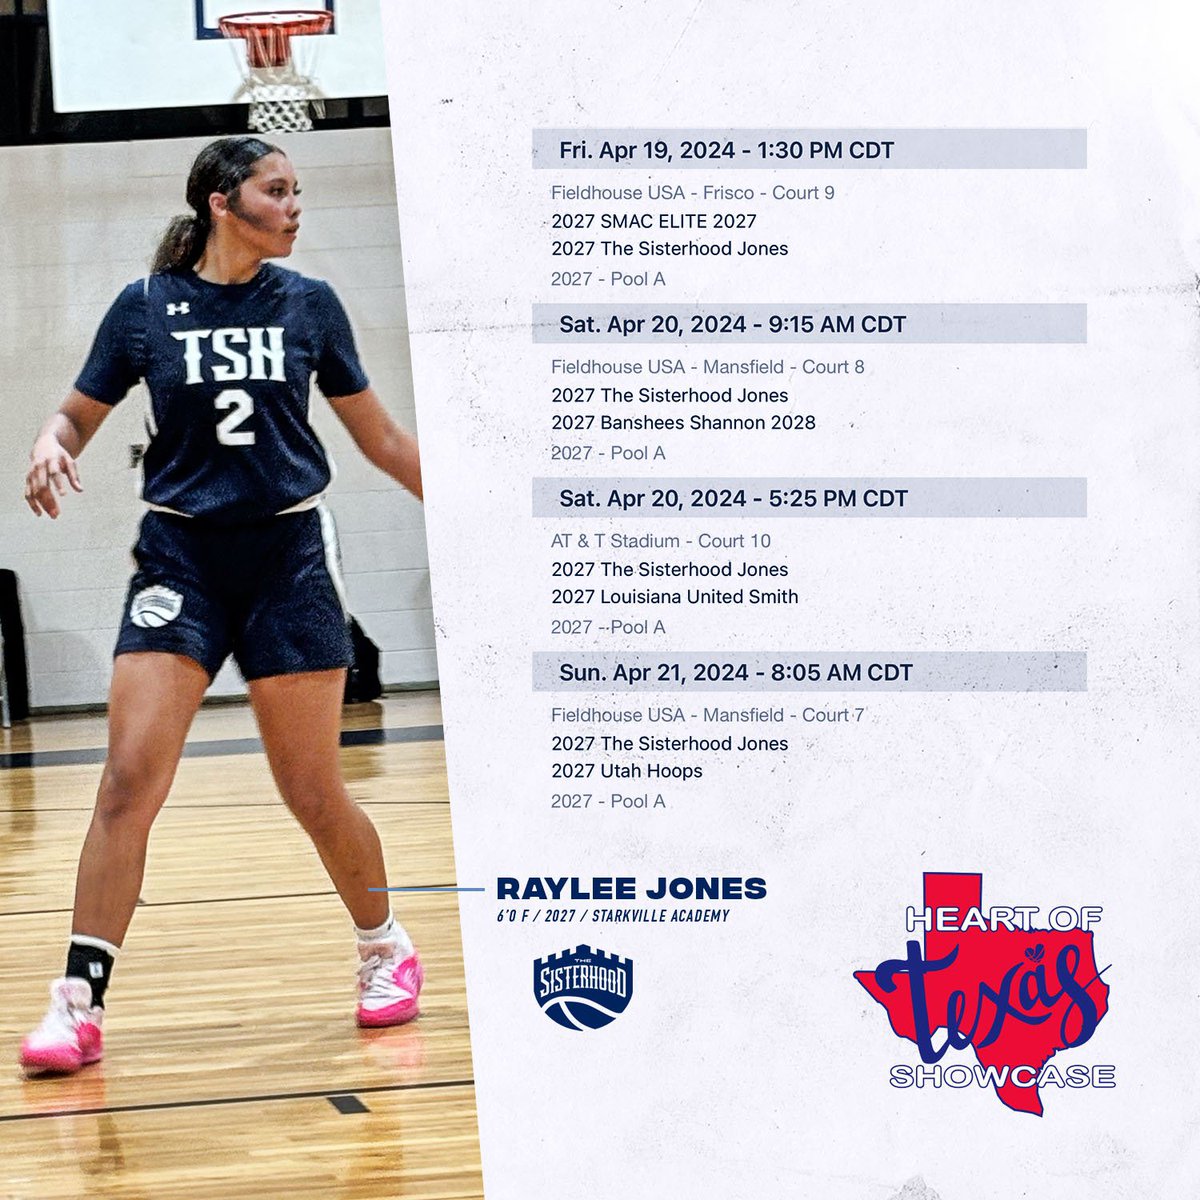 Catch me this weekend in Dallas at The Heart of Texas Showcase!! #NCAA #LivePeriod #AAU #TSH @TSHLadyLions